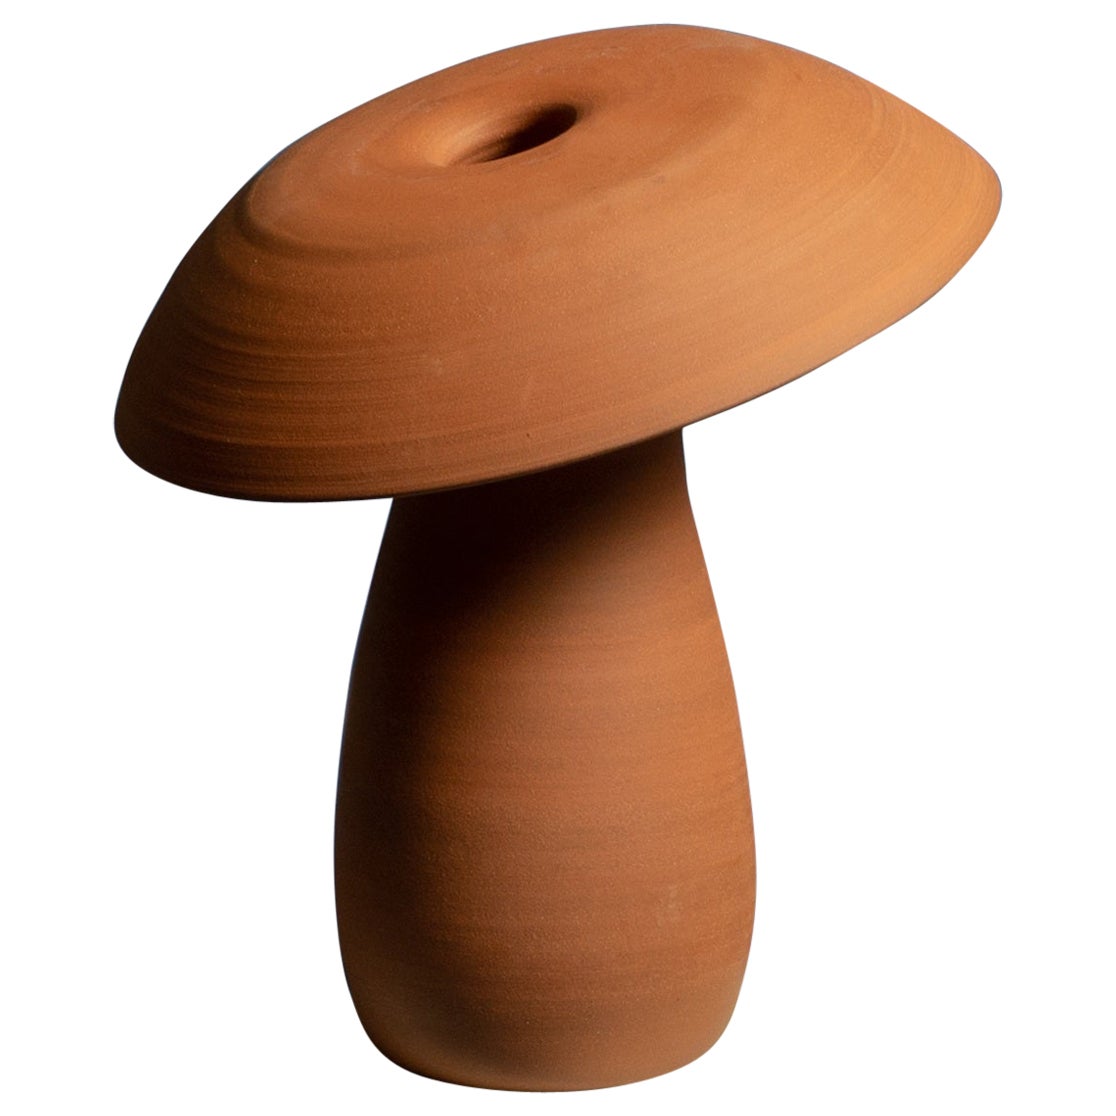 Terra-Cotta Raw Small Mushroom Lamp by Nick Pourfard For Sale